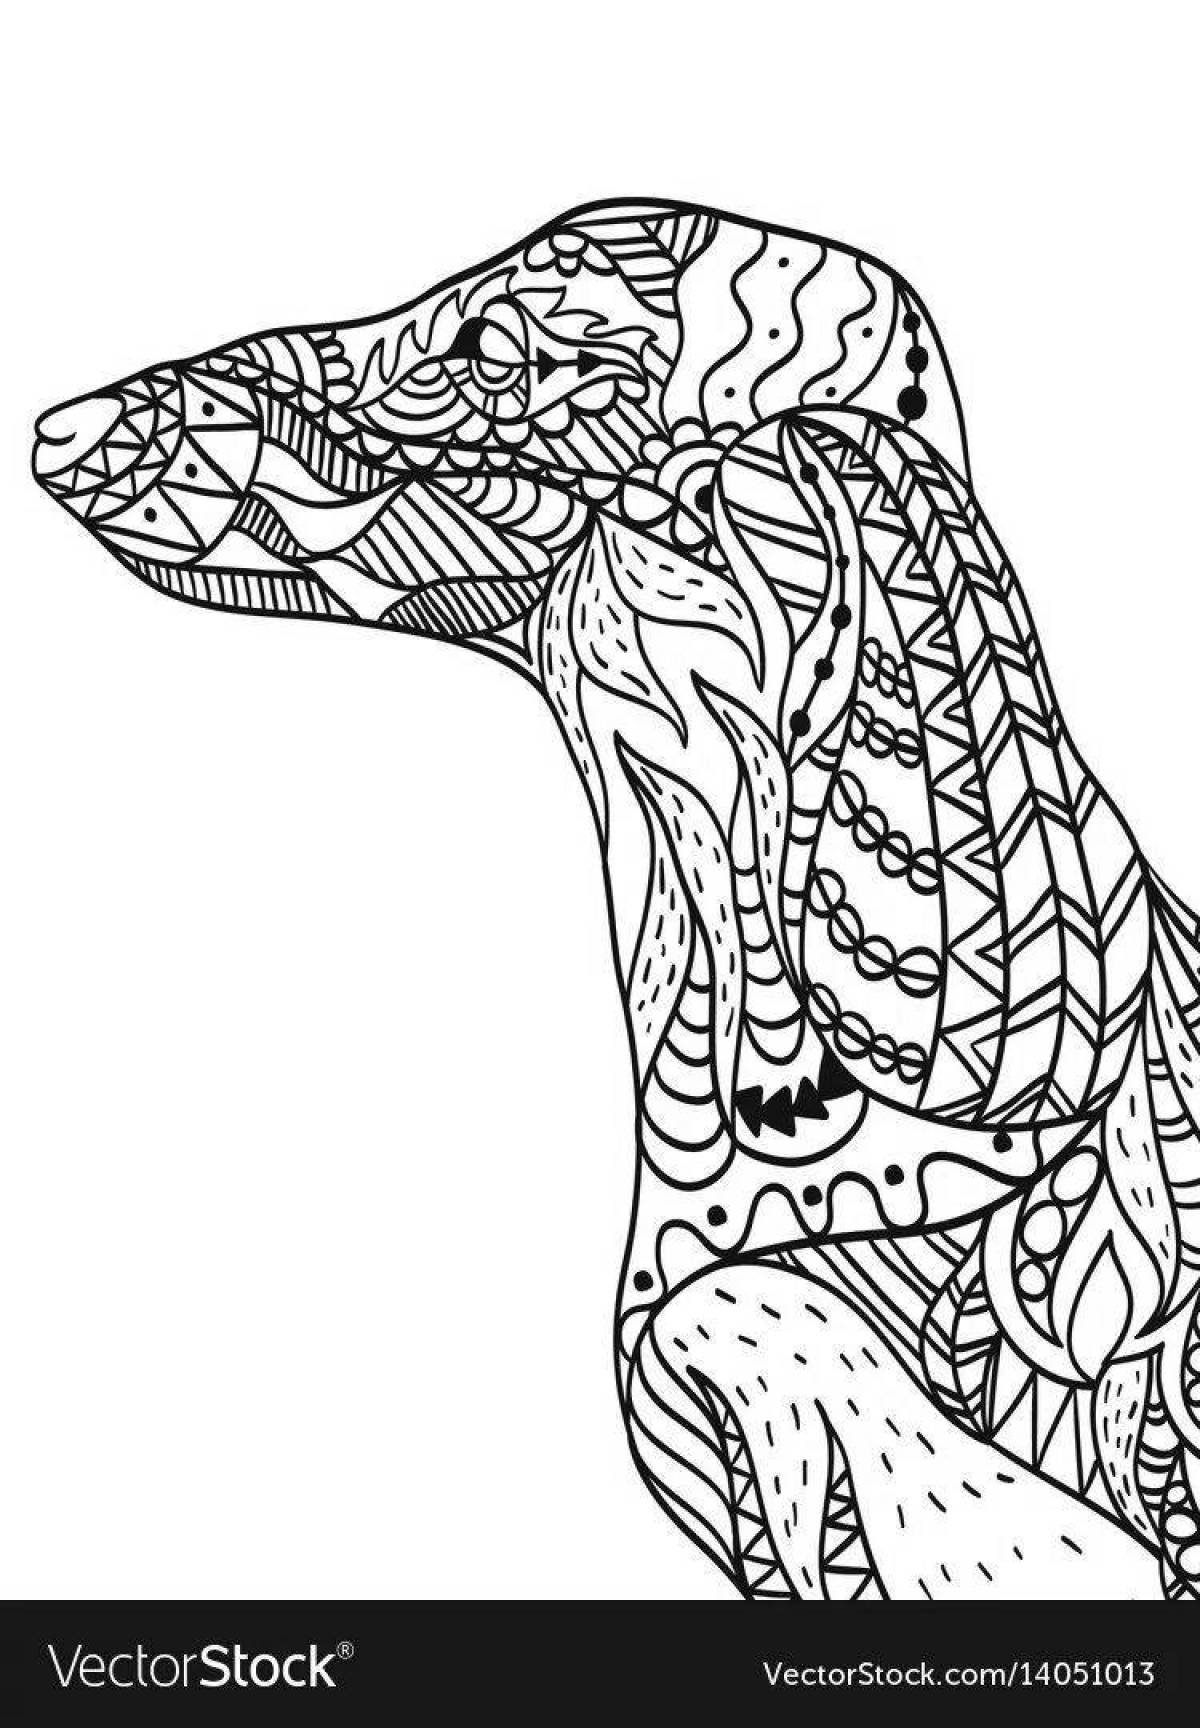 Relaxing dachshund antistress coloring book